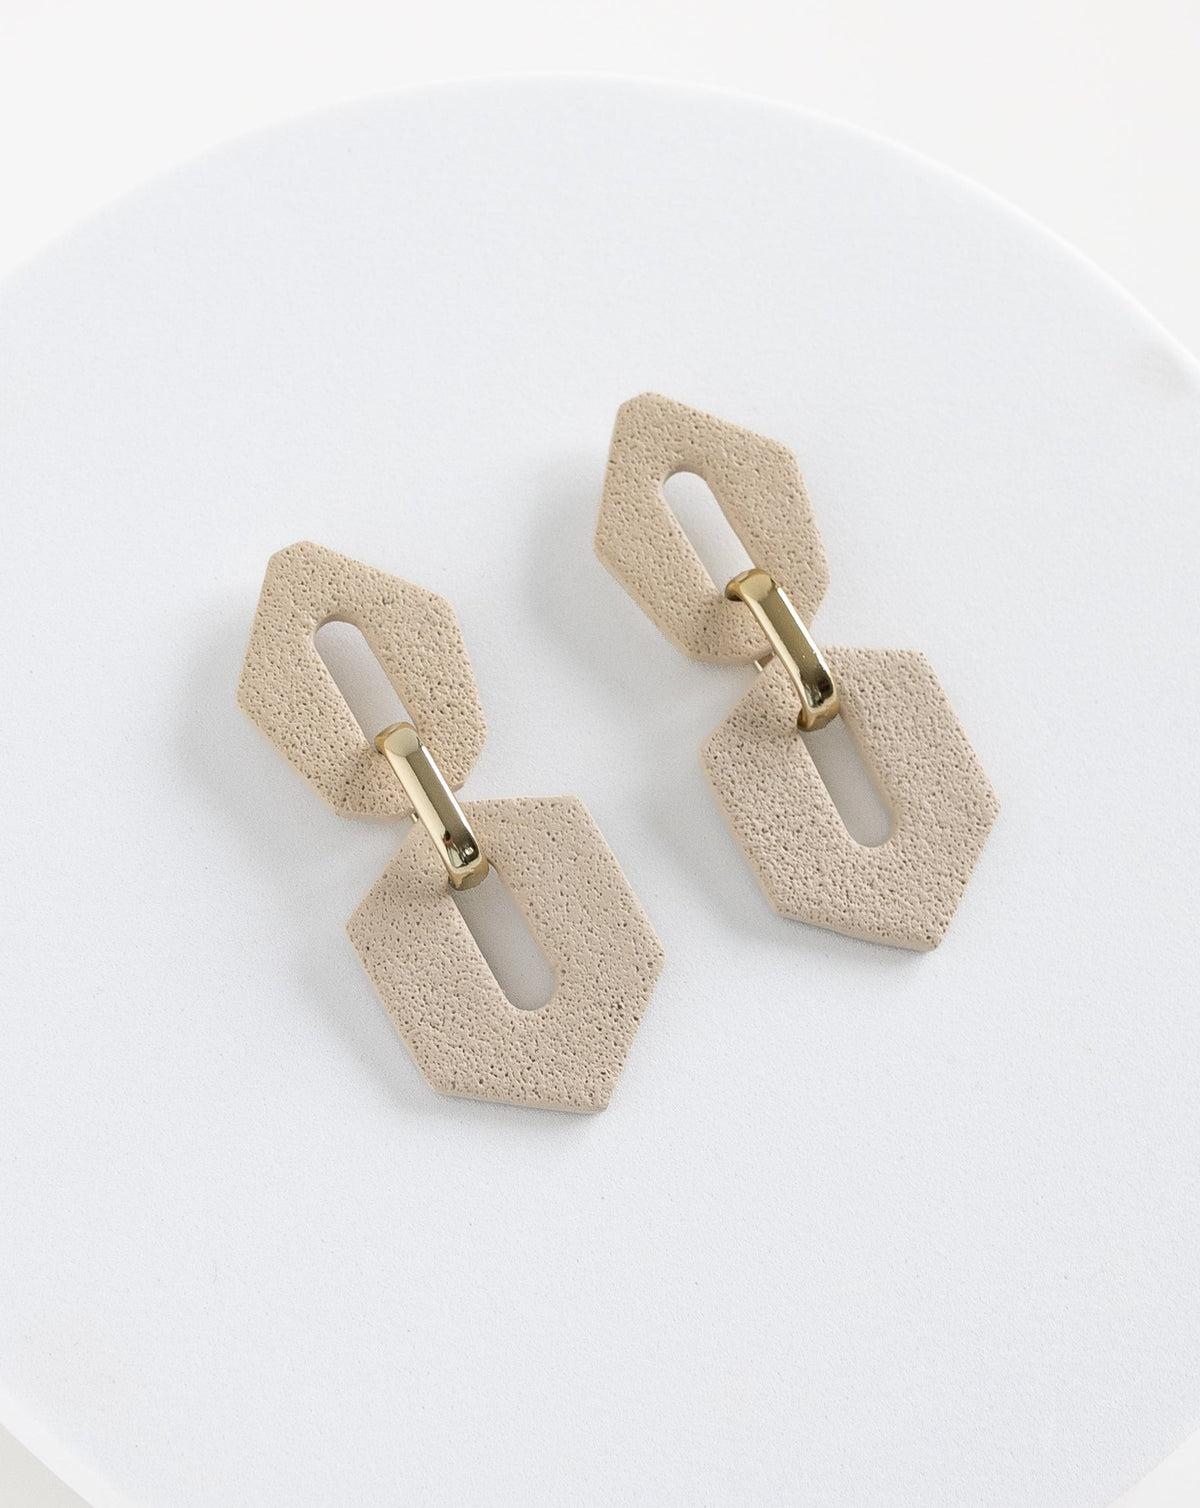 Angled view of Shilla earrings in Beige color.